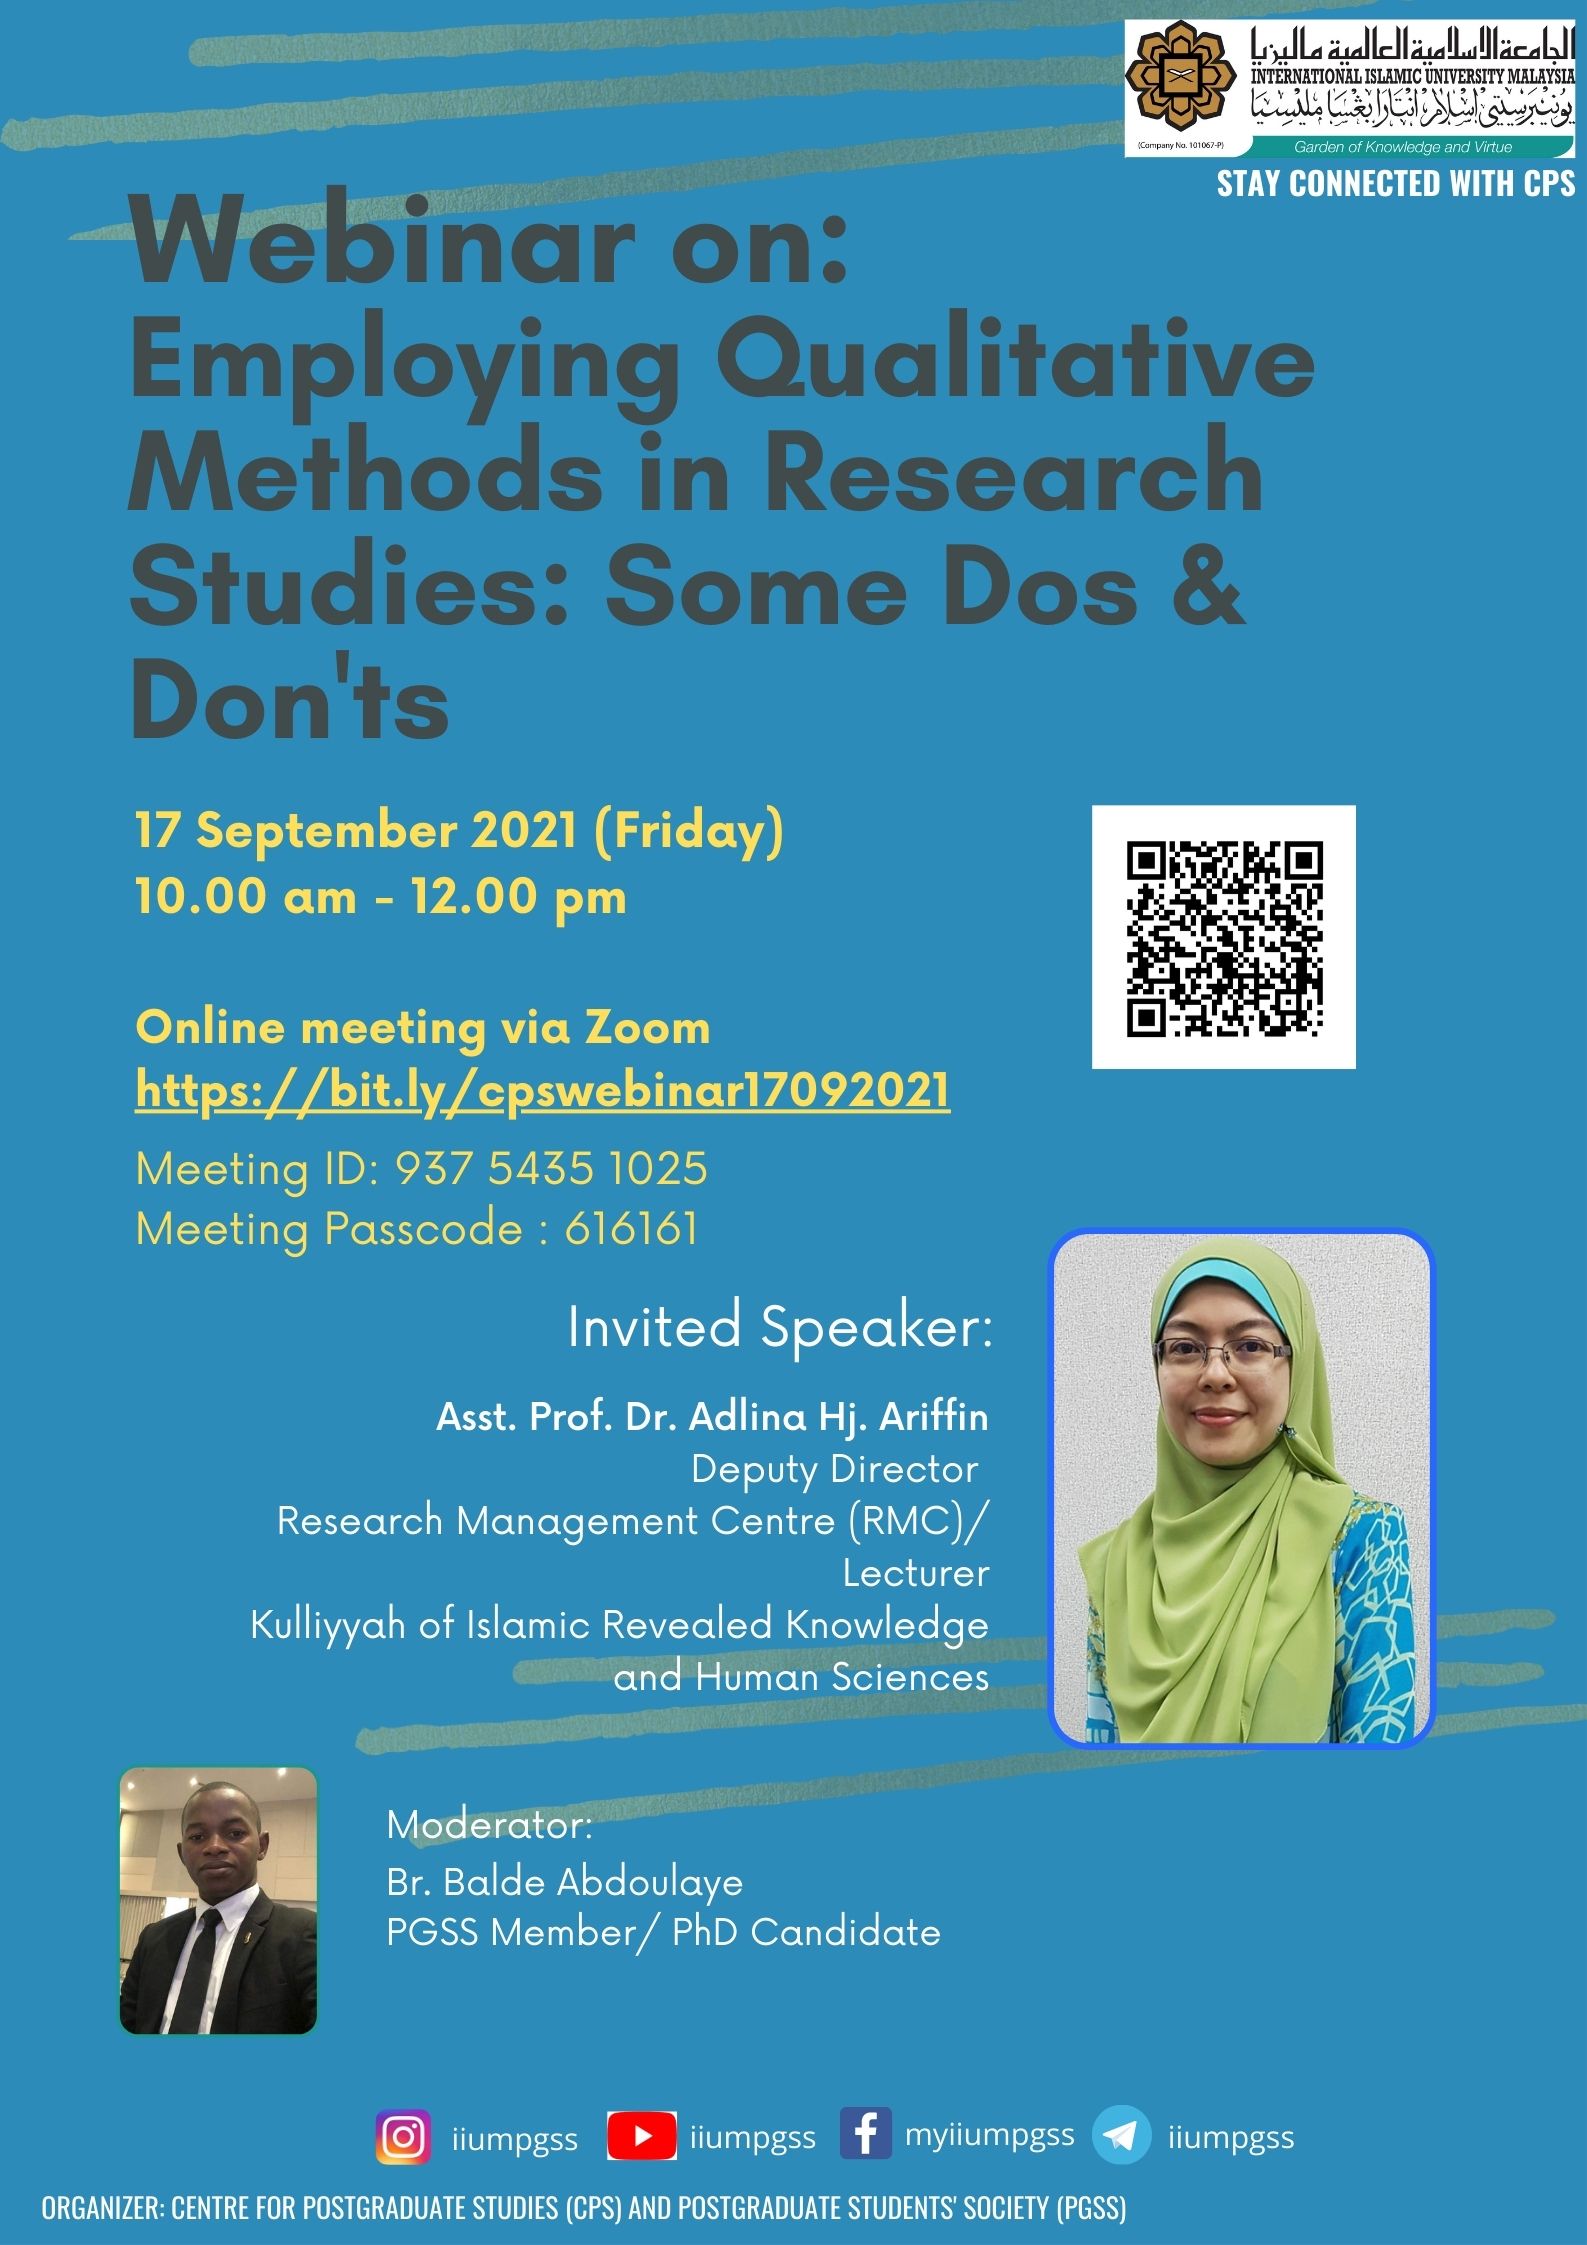 WEBINAR ON EMPLOYING QUALITATIVE METHODS IN RESEARCH STUDIES: SOME DOS & DONT'S